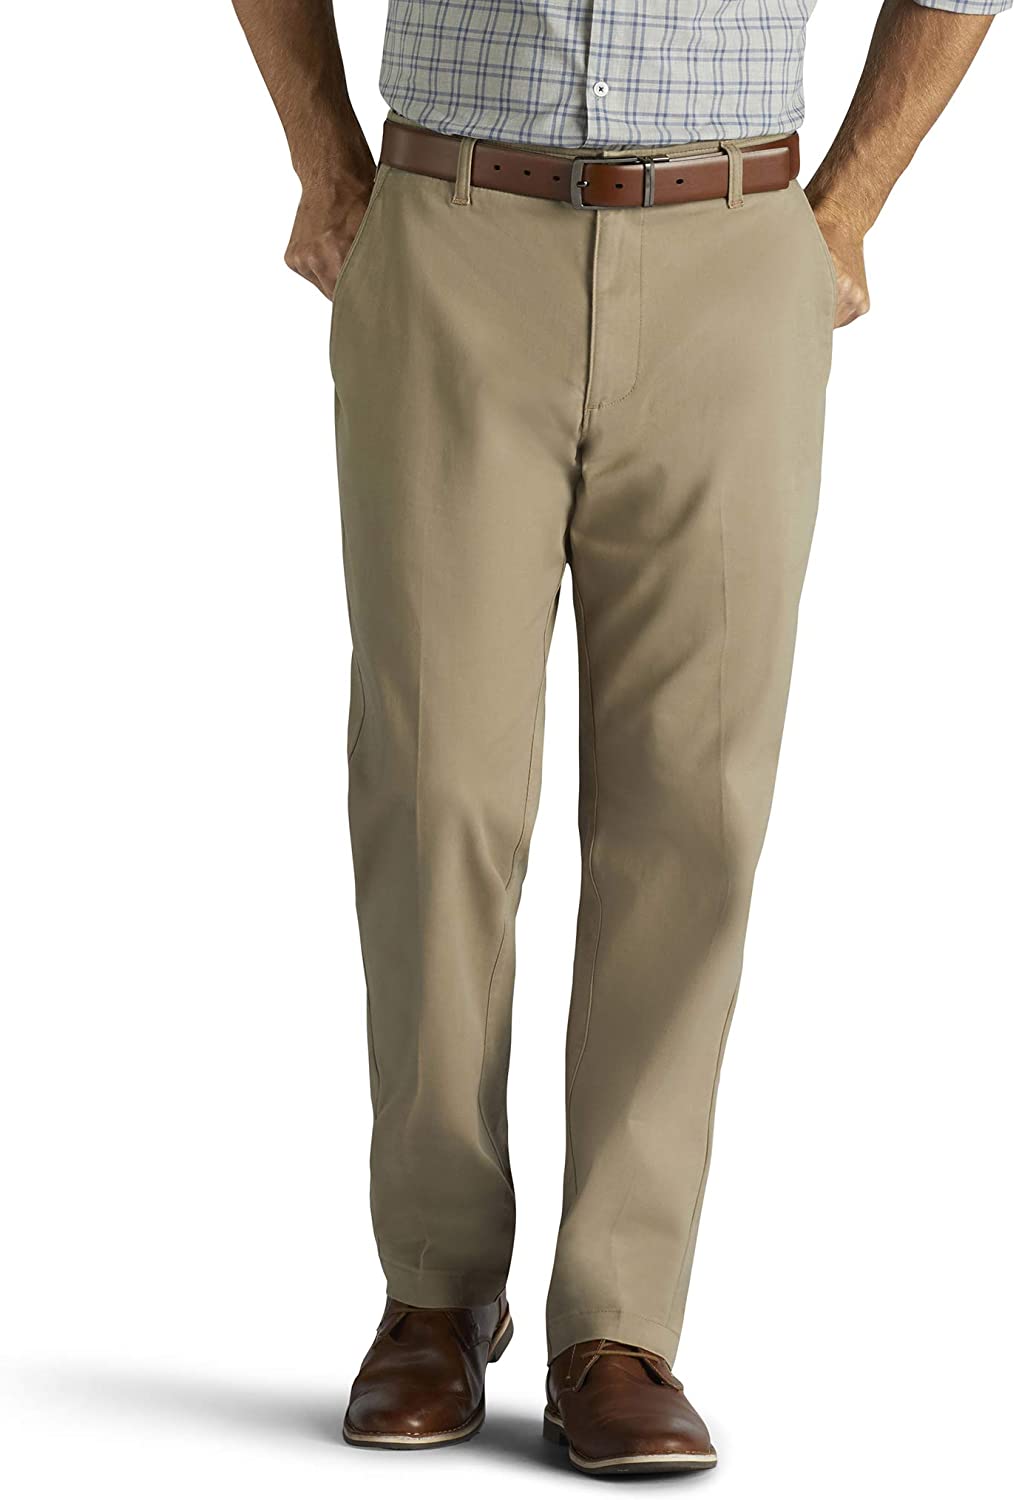 Lee Men's Performance Series Extreme Comfort Relaxed Pant | eBay